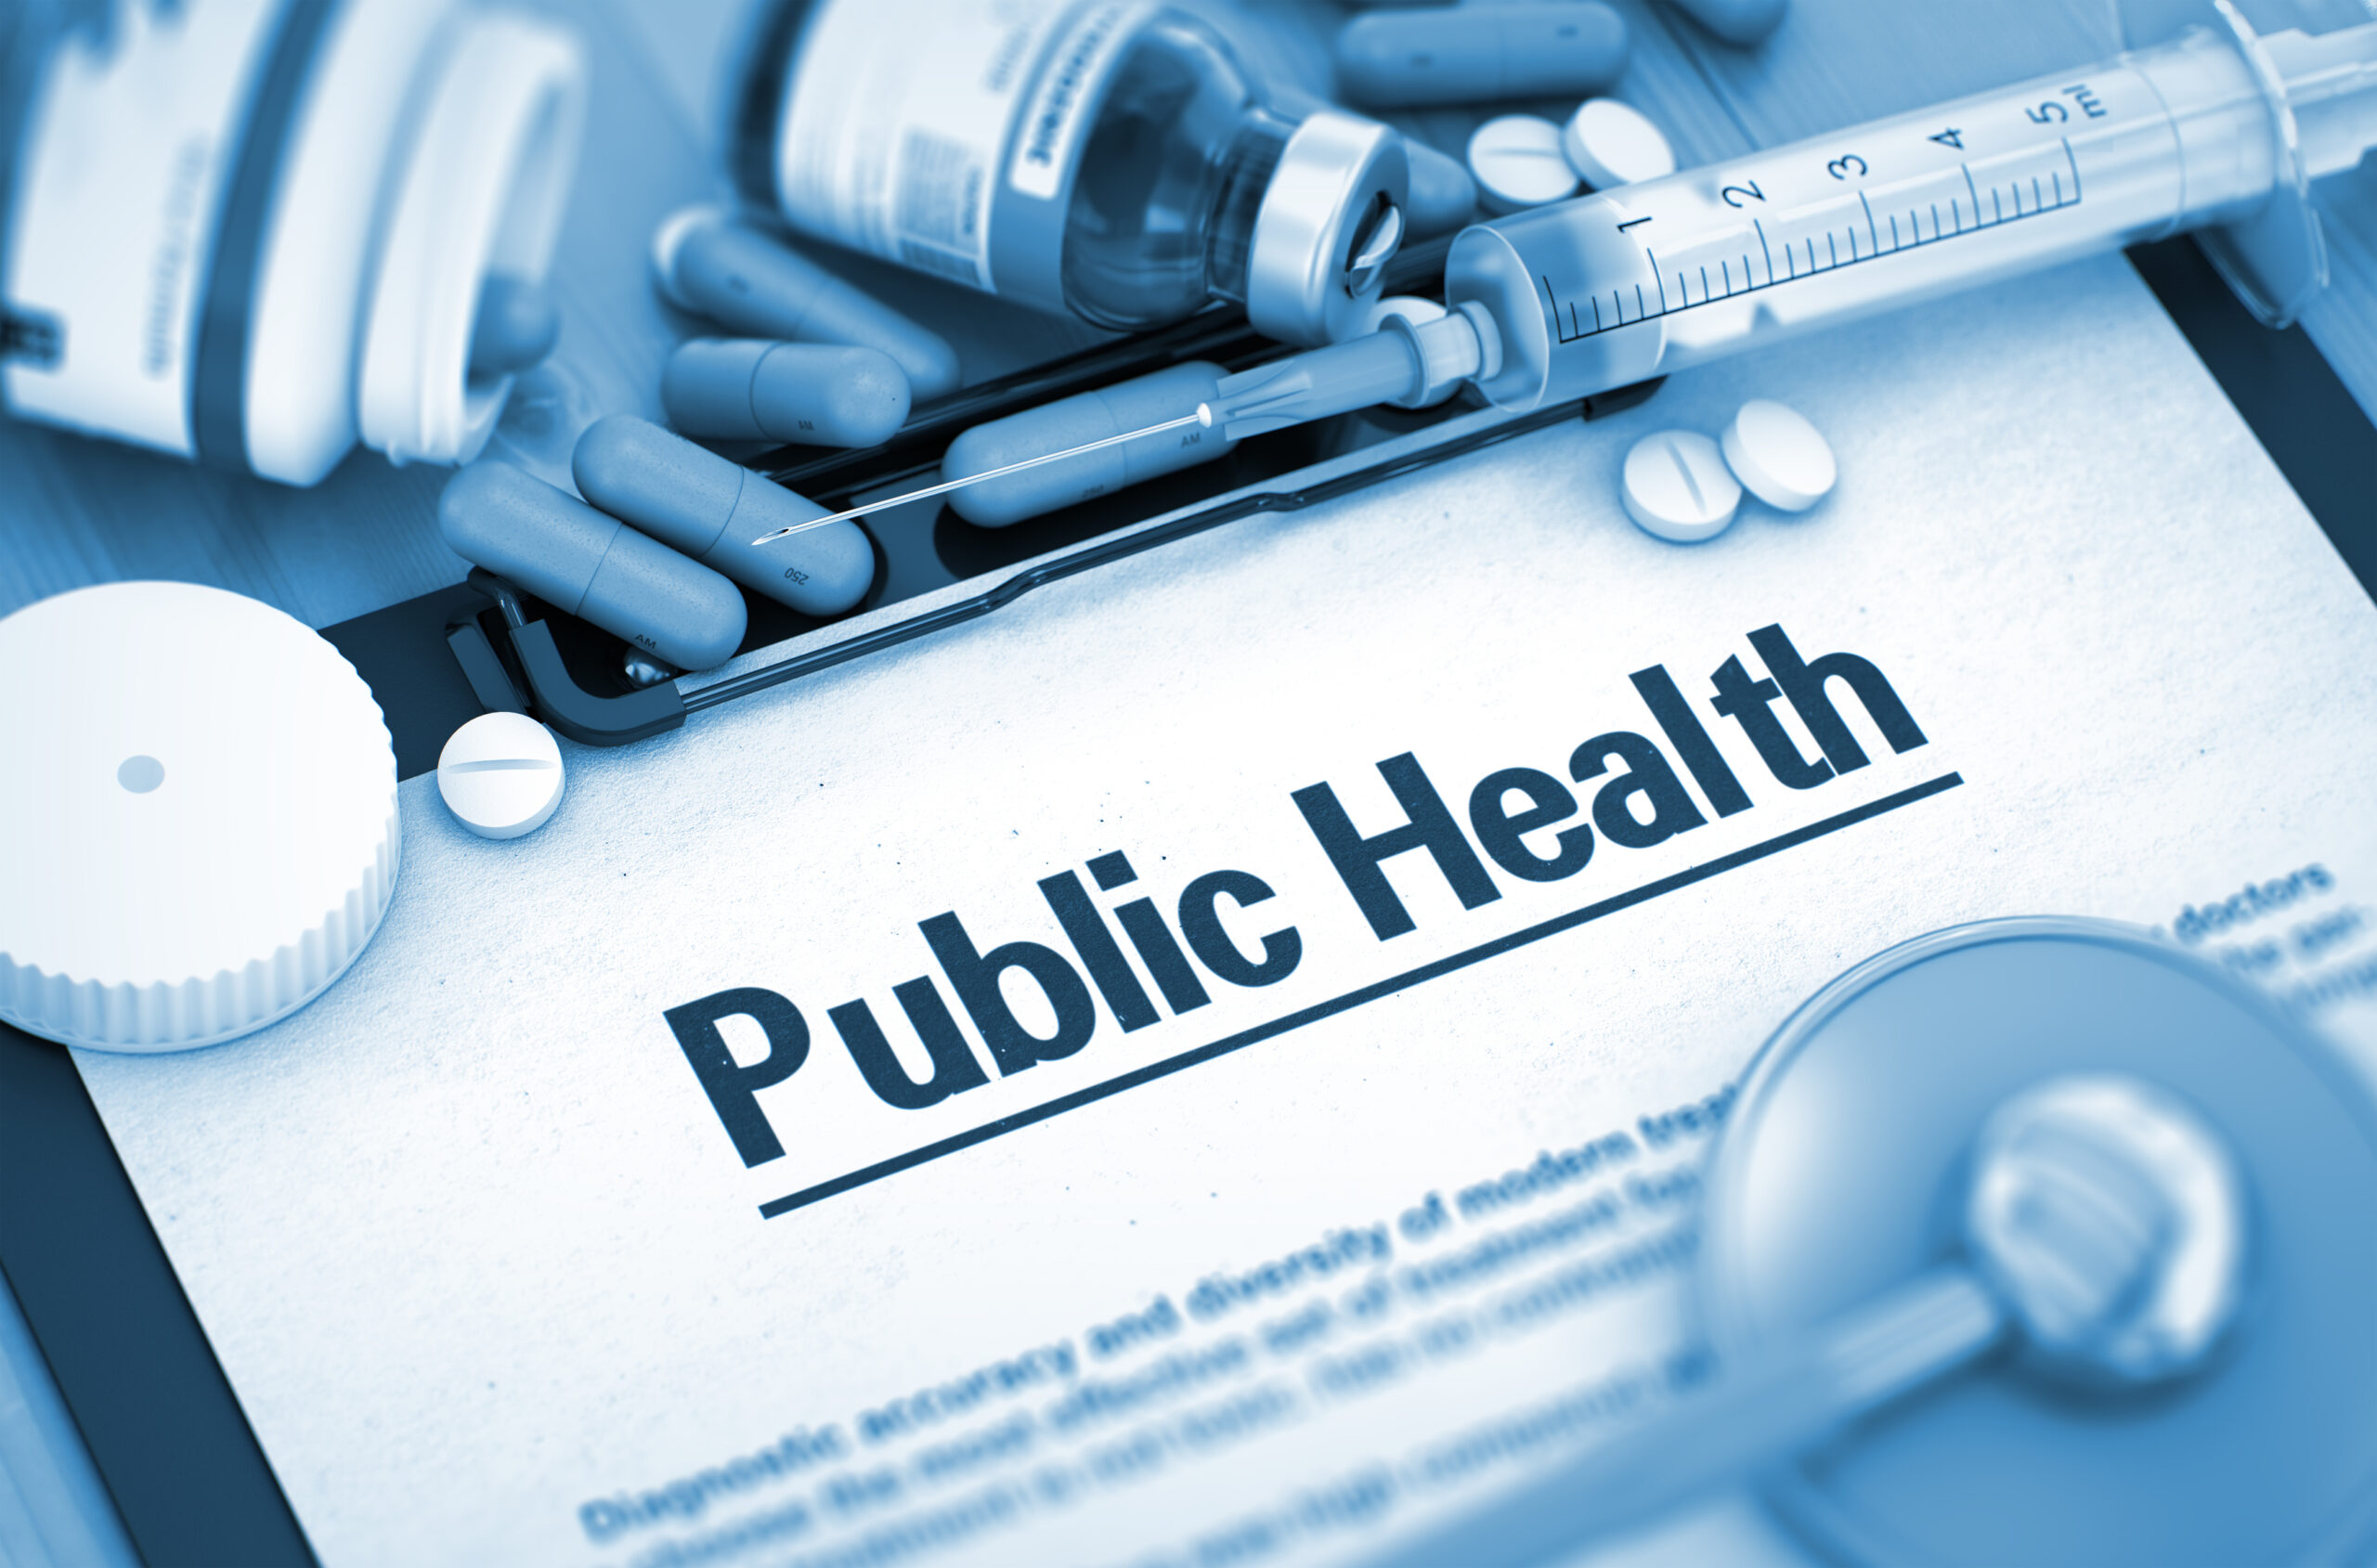 research and public health